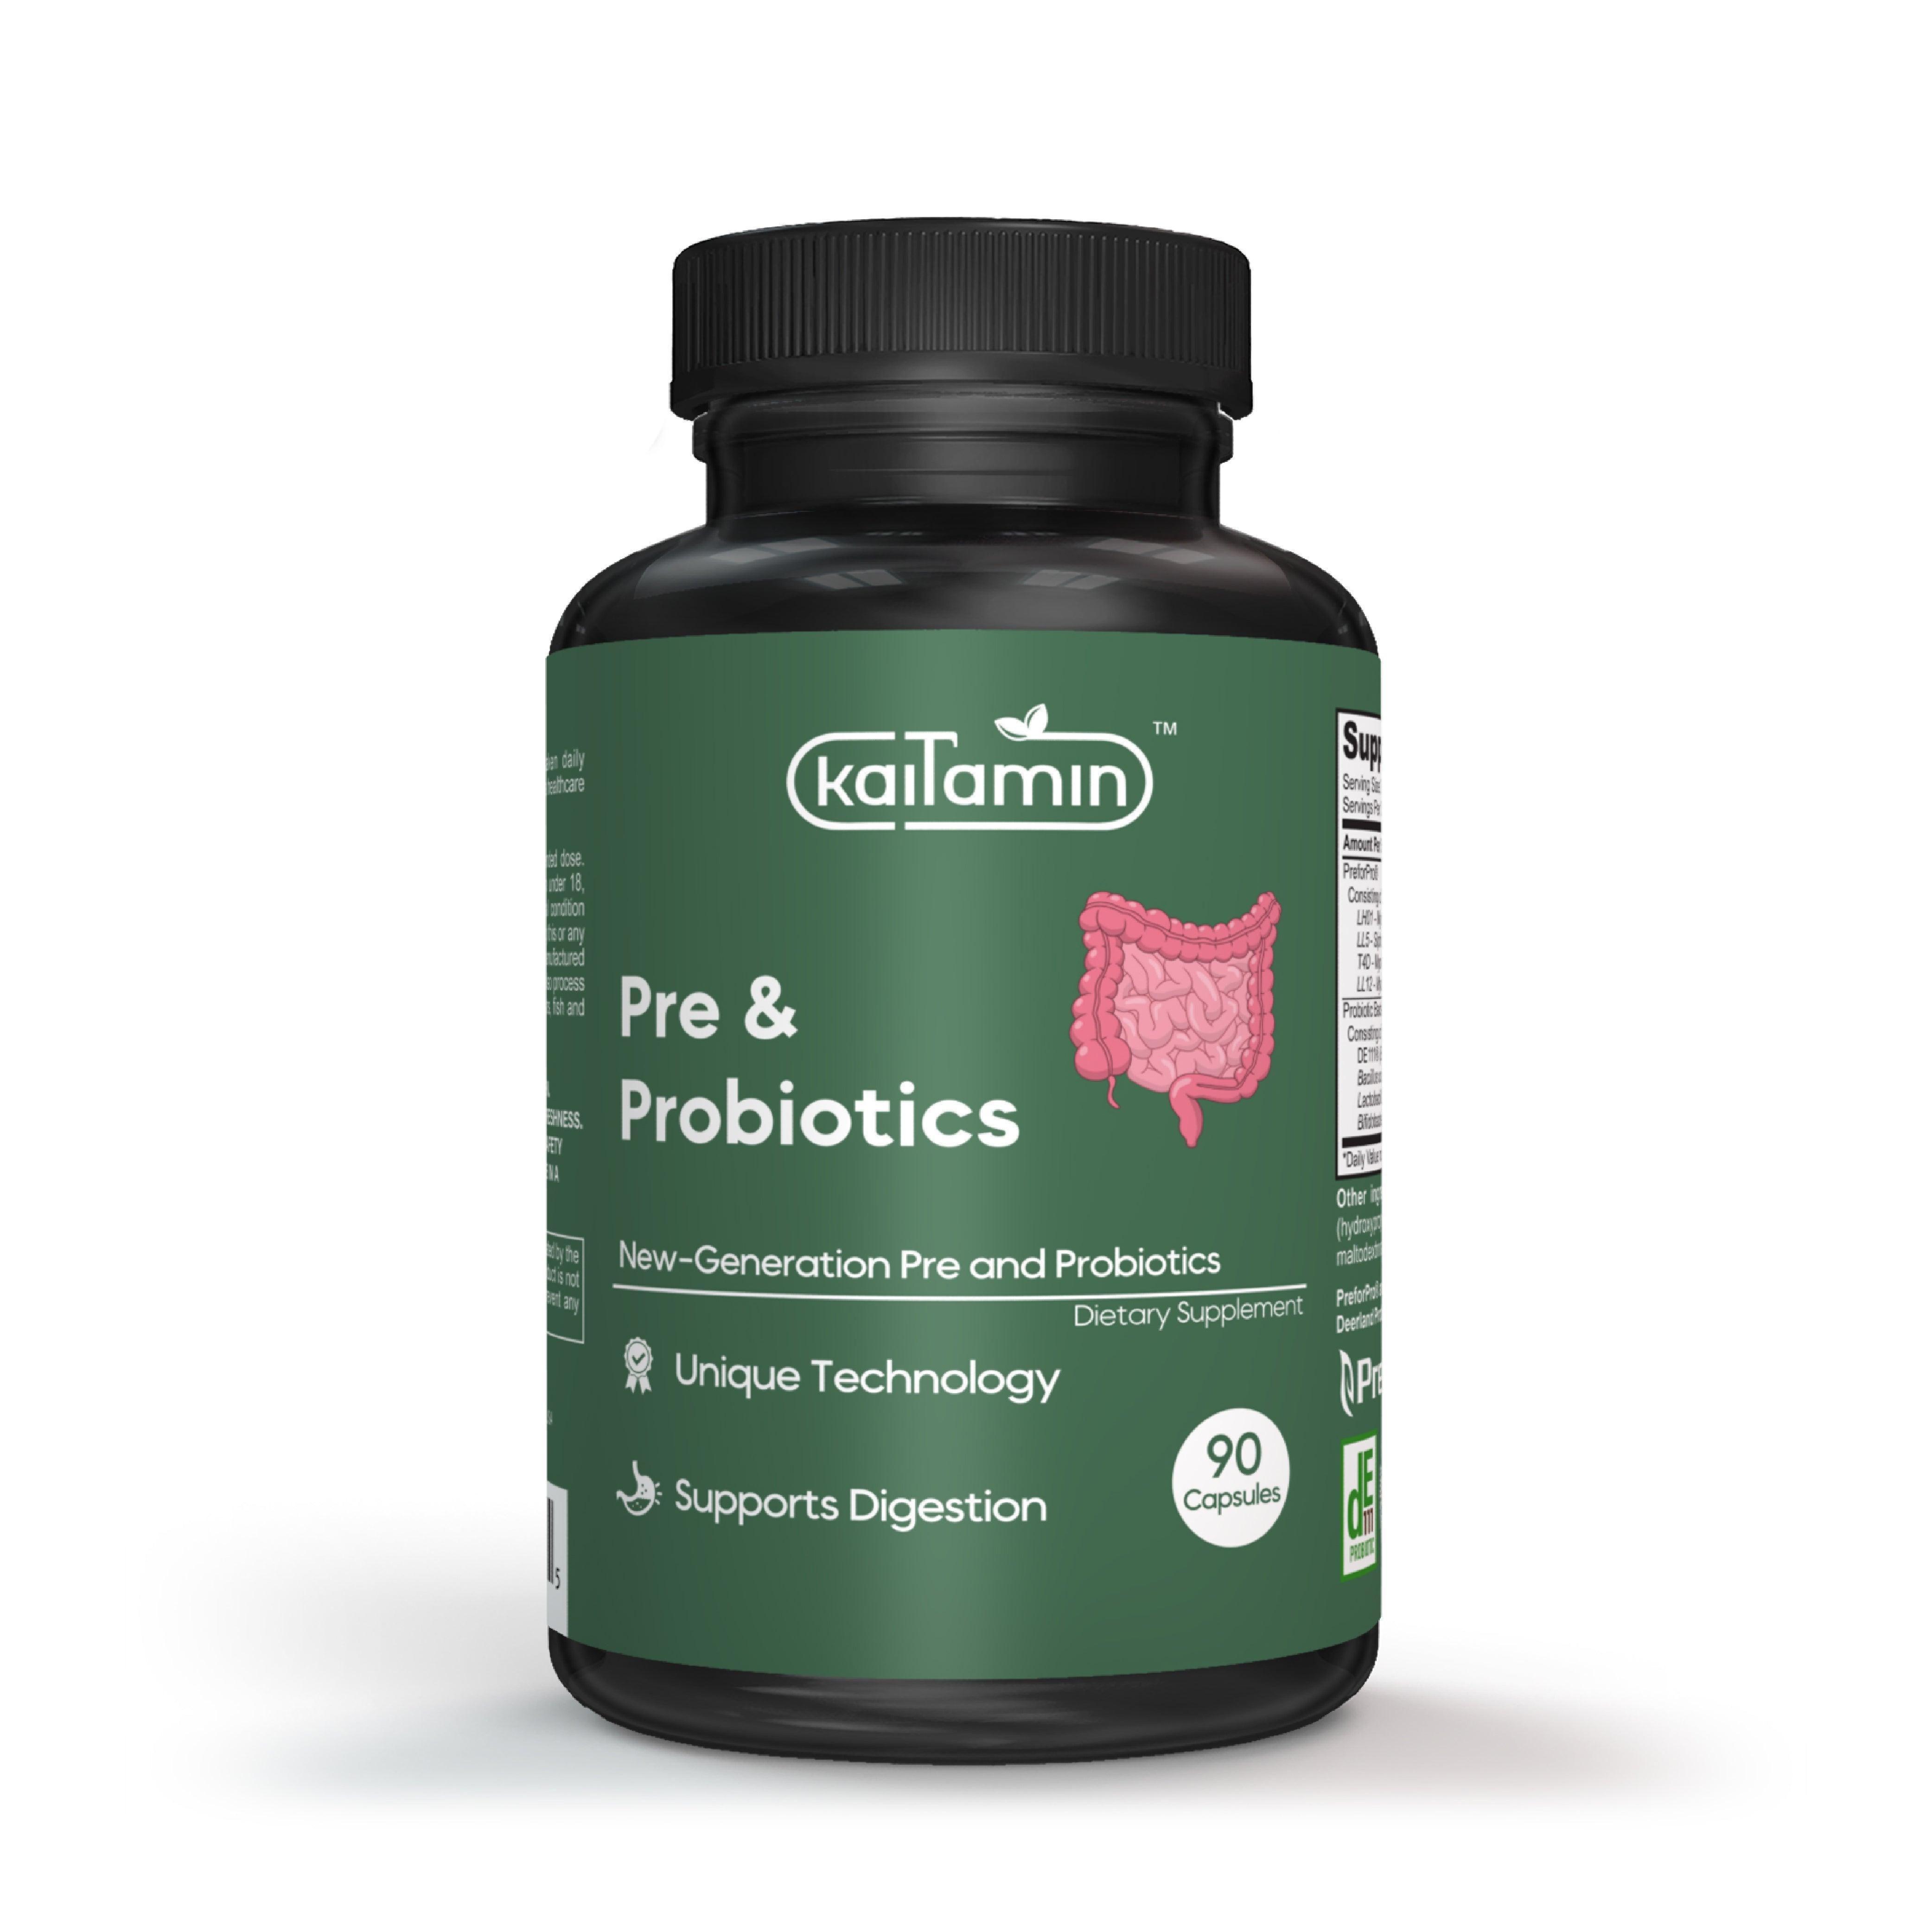 Pre & Probiotics - For Digestion and Immunity - 90 Capsules - Kaitamin